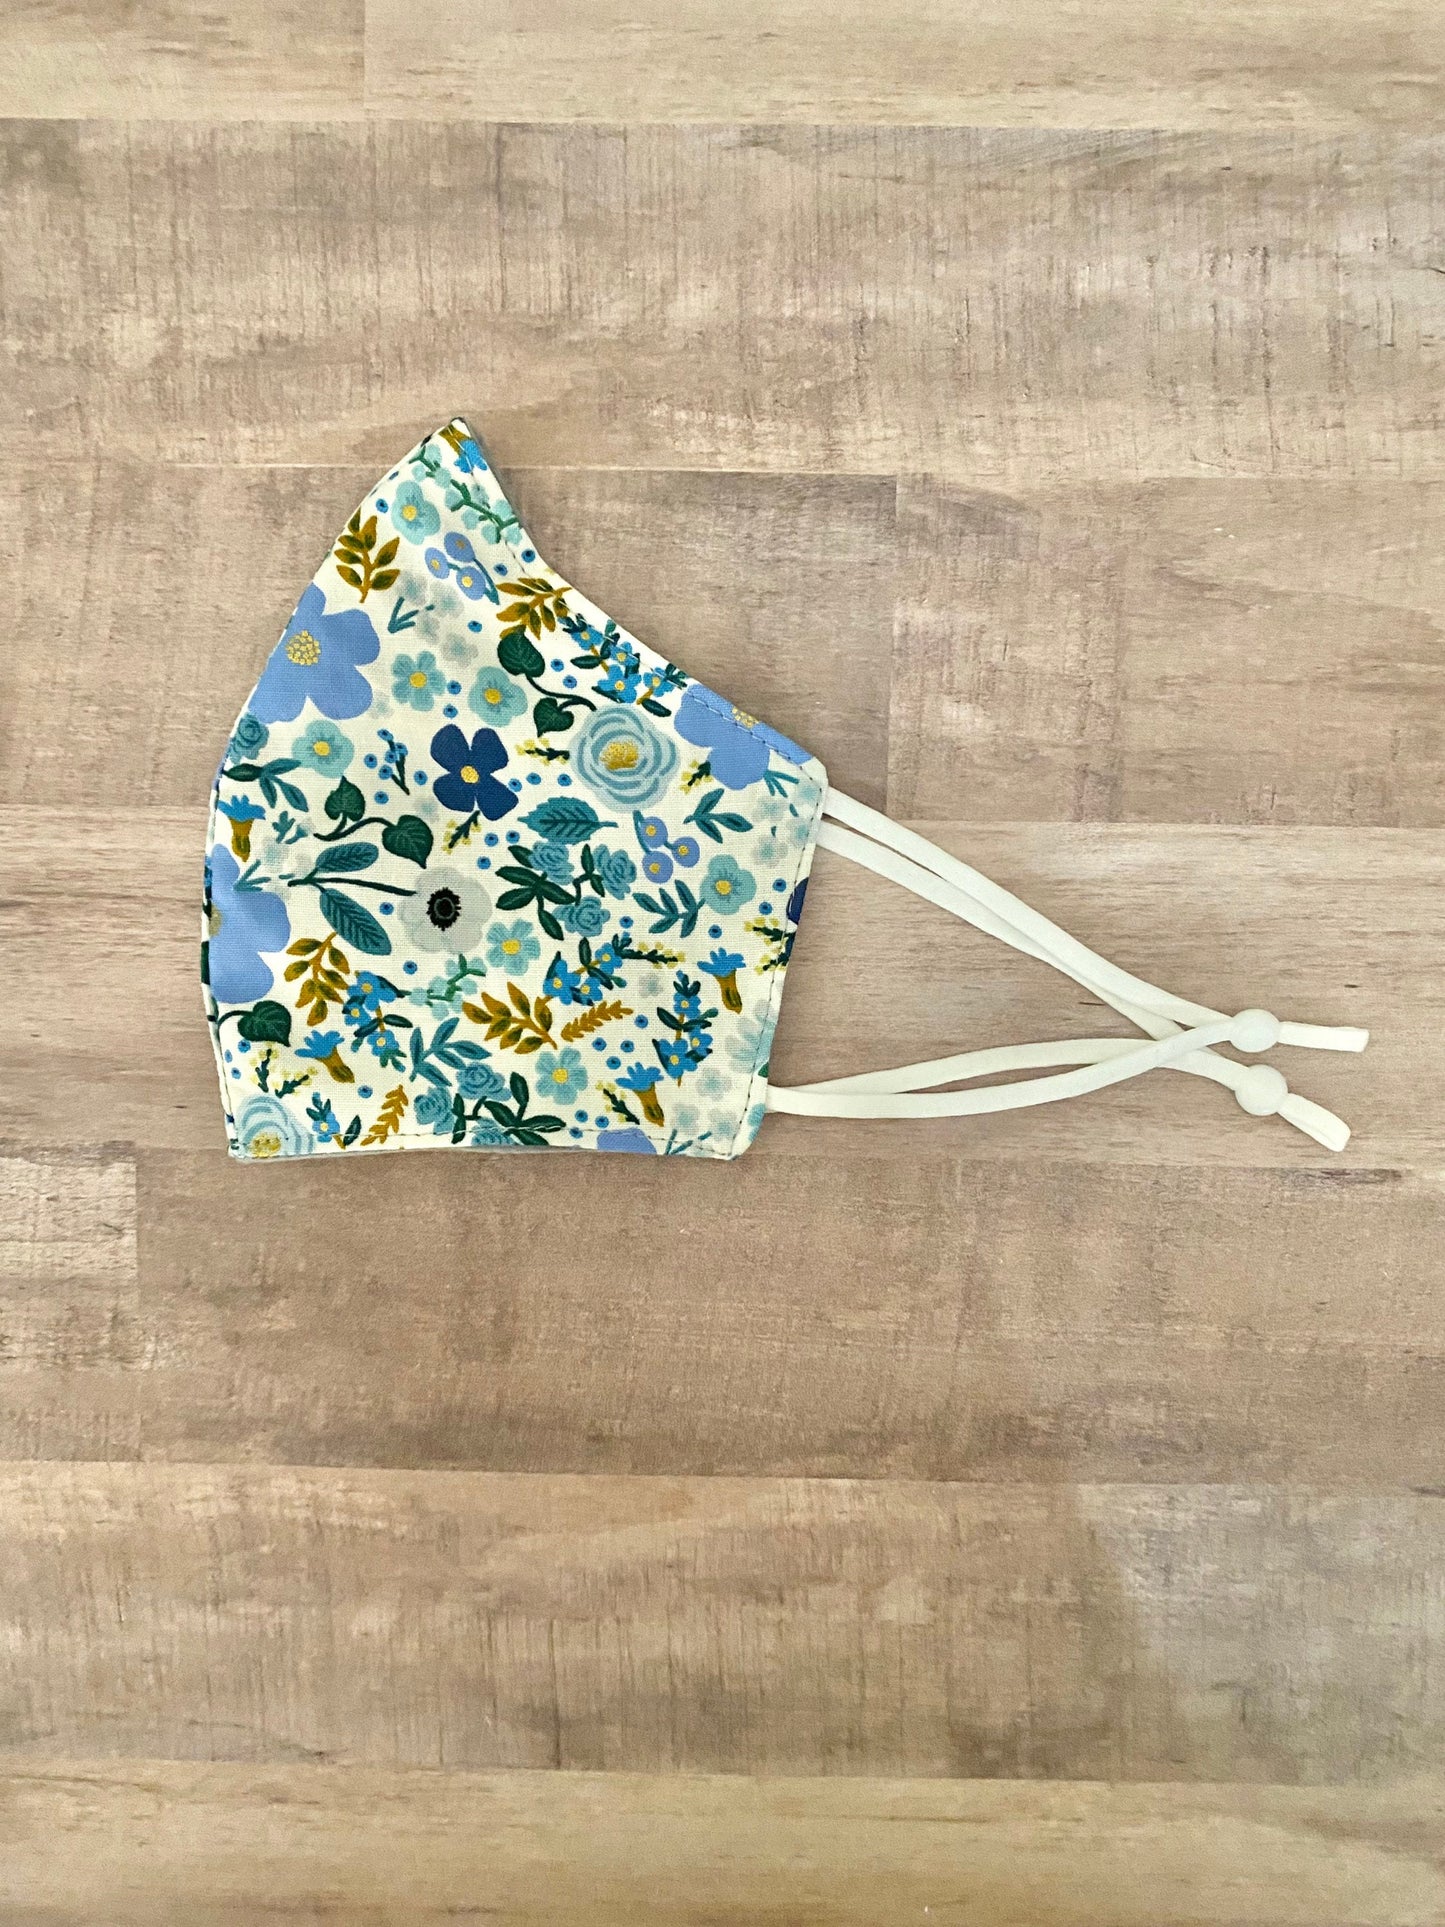 Rifle Paper Co. Blue and Gold Floral Adjustable Mask